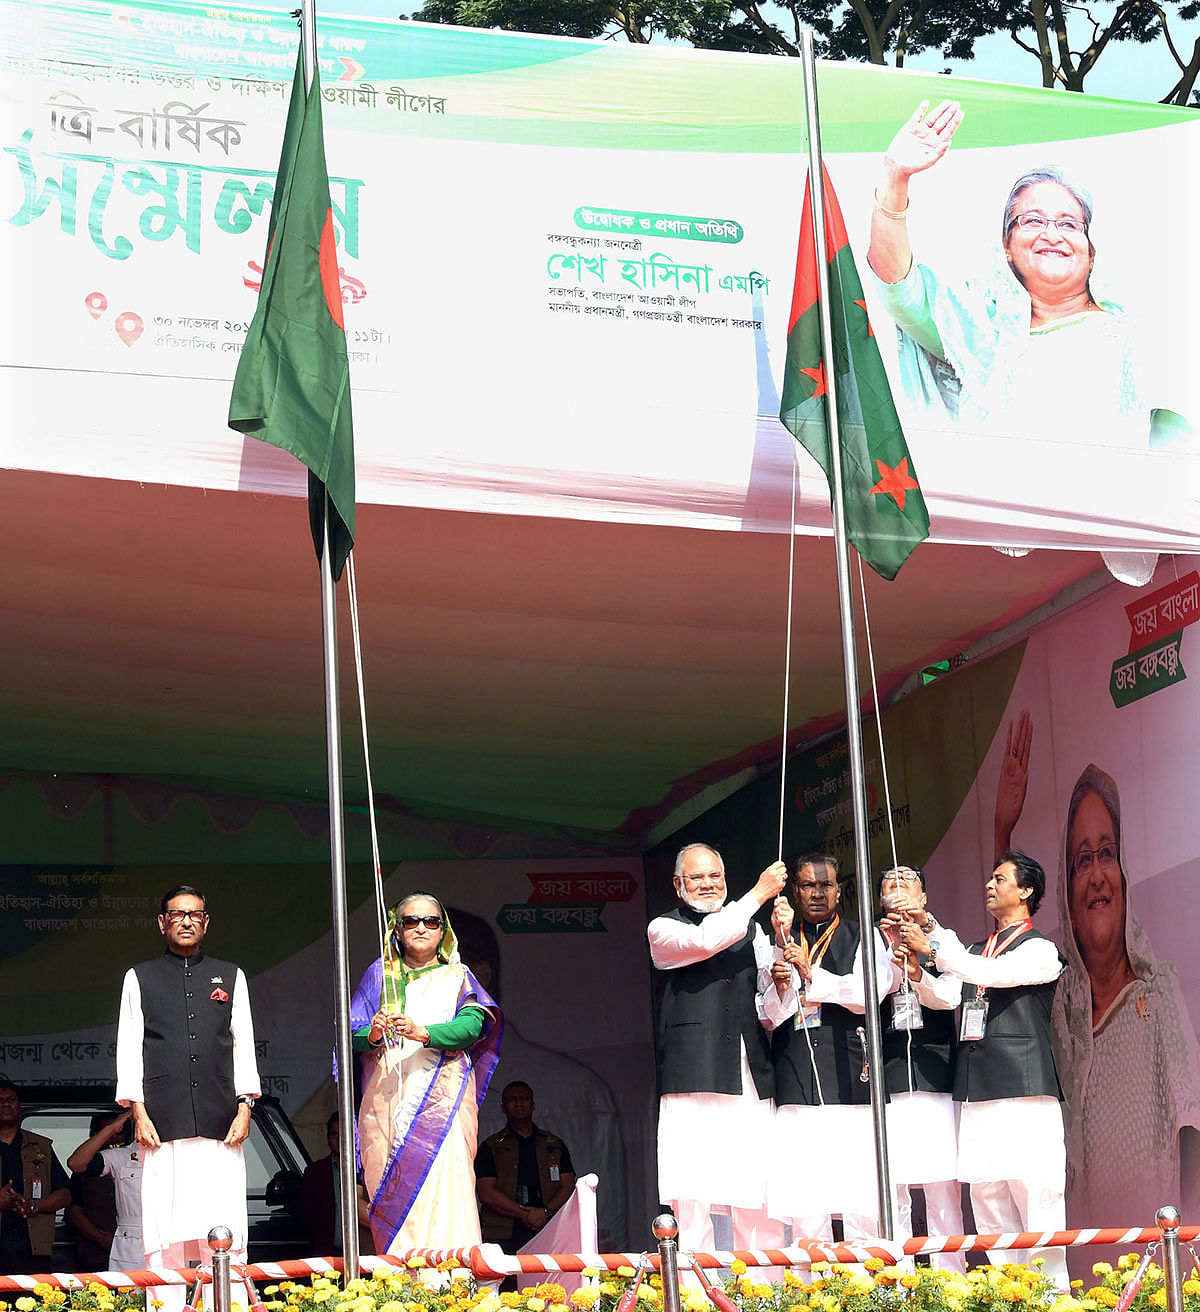 Prime minister Sheikh Hasina, also the Awami League president, opened the the triennial council of Dhaka north and south city units of AL as the chief guest by hoisting the national flag at the historic Suhrawardy Udyan on Saturday. Photo: PID